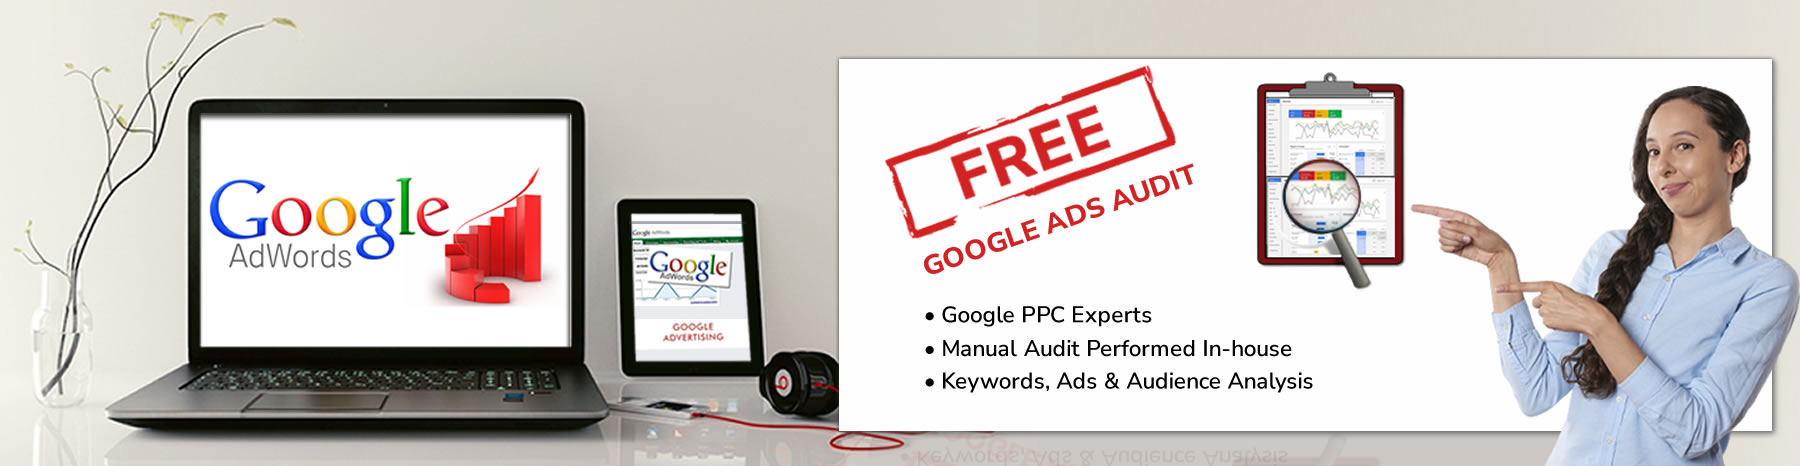 Free Google ad words banner